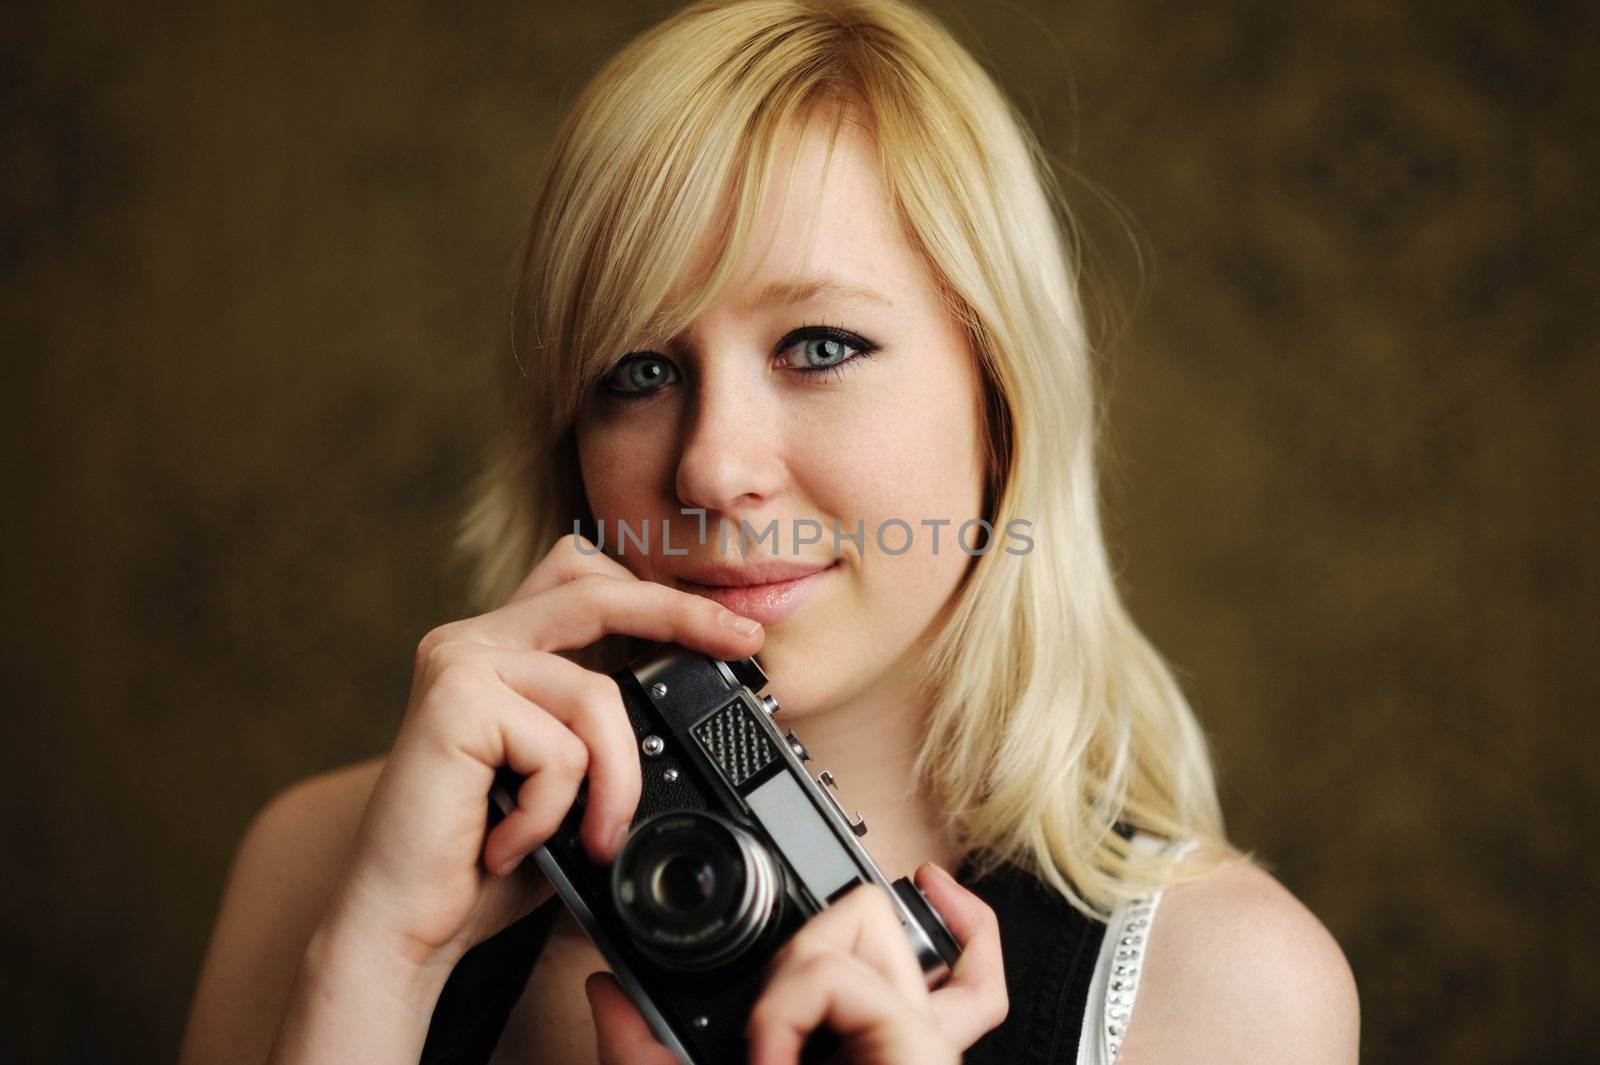 An image of a young woman with a camera